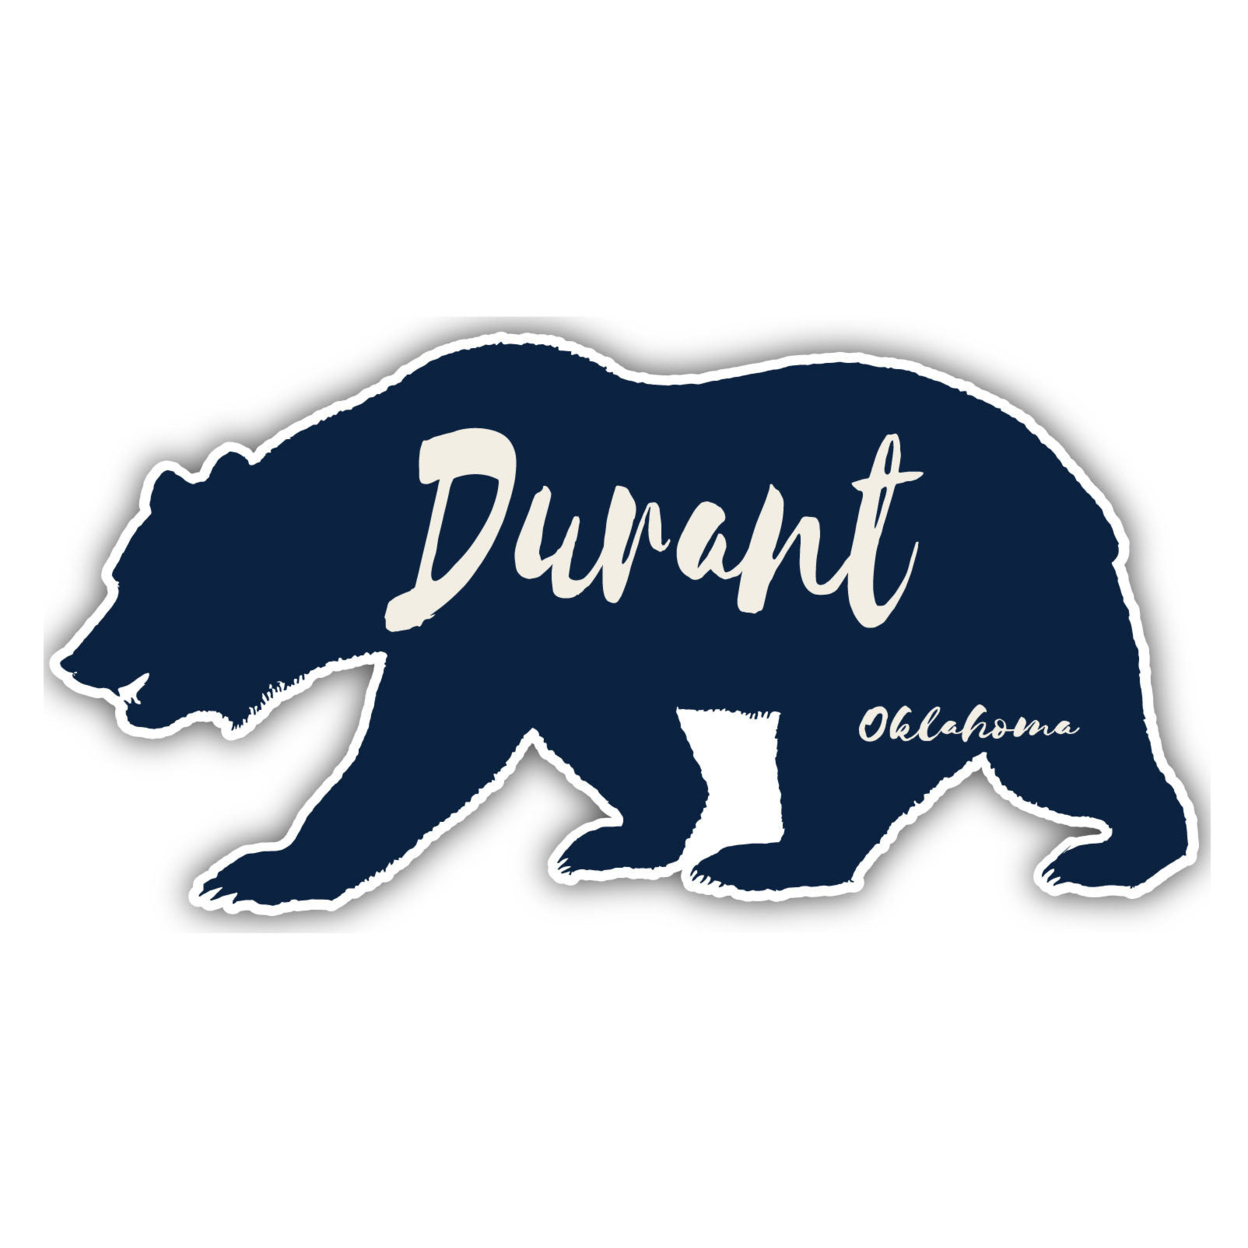 Durant Oklahoma Souvenir Decorative Stickers (Choose Theme And Size) - 4-Pack, 2-Inch, Bear